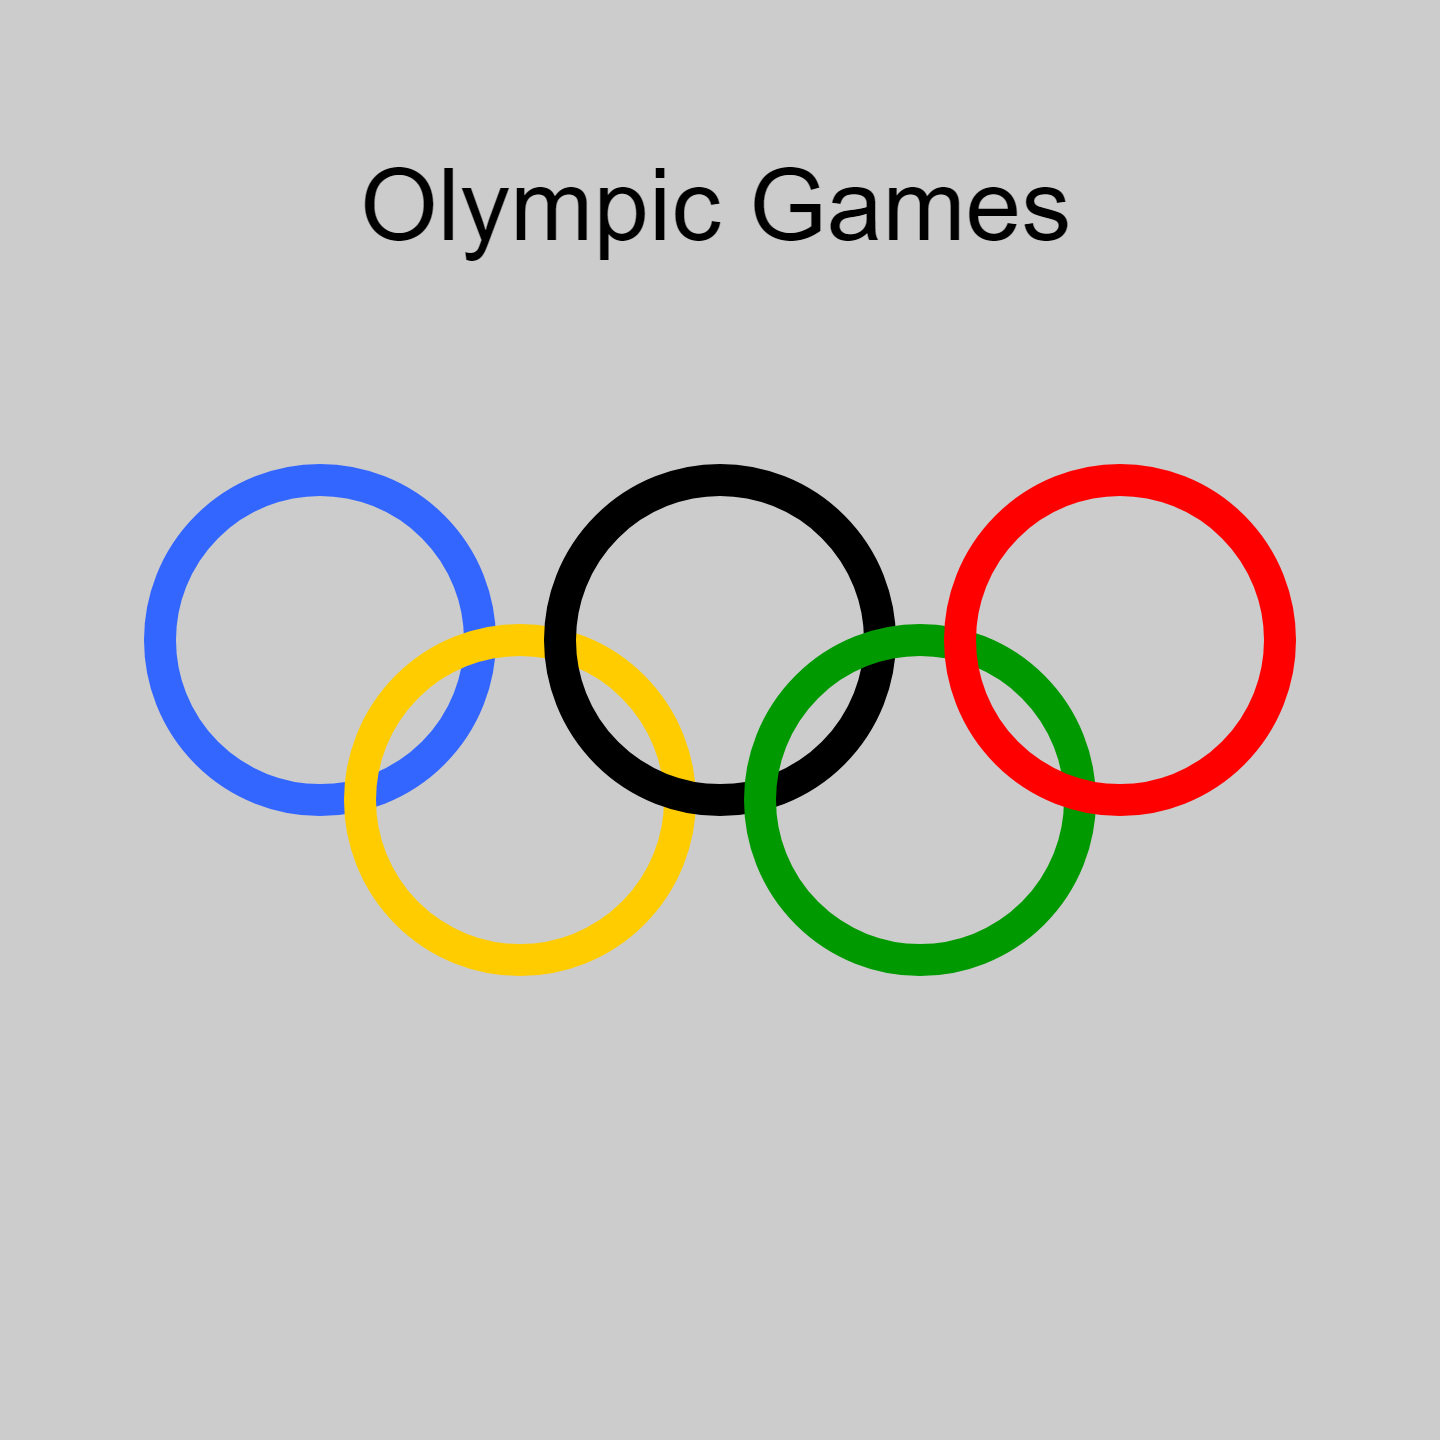 File:Tokyo 2020 Olympic Games- Monument of Olympic Rings.jpg - Wikipedia